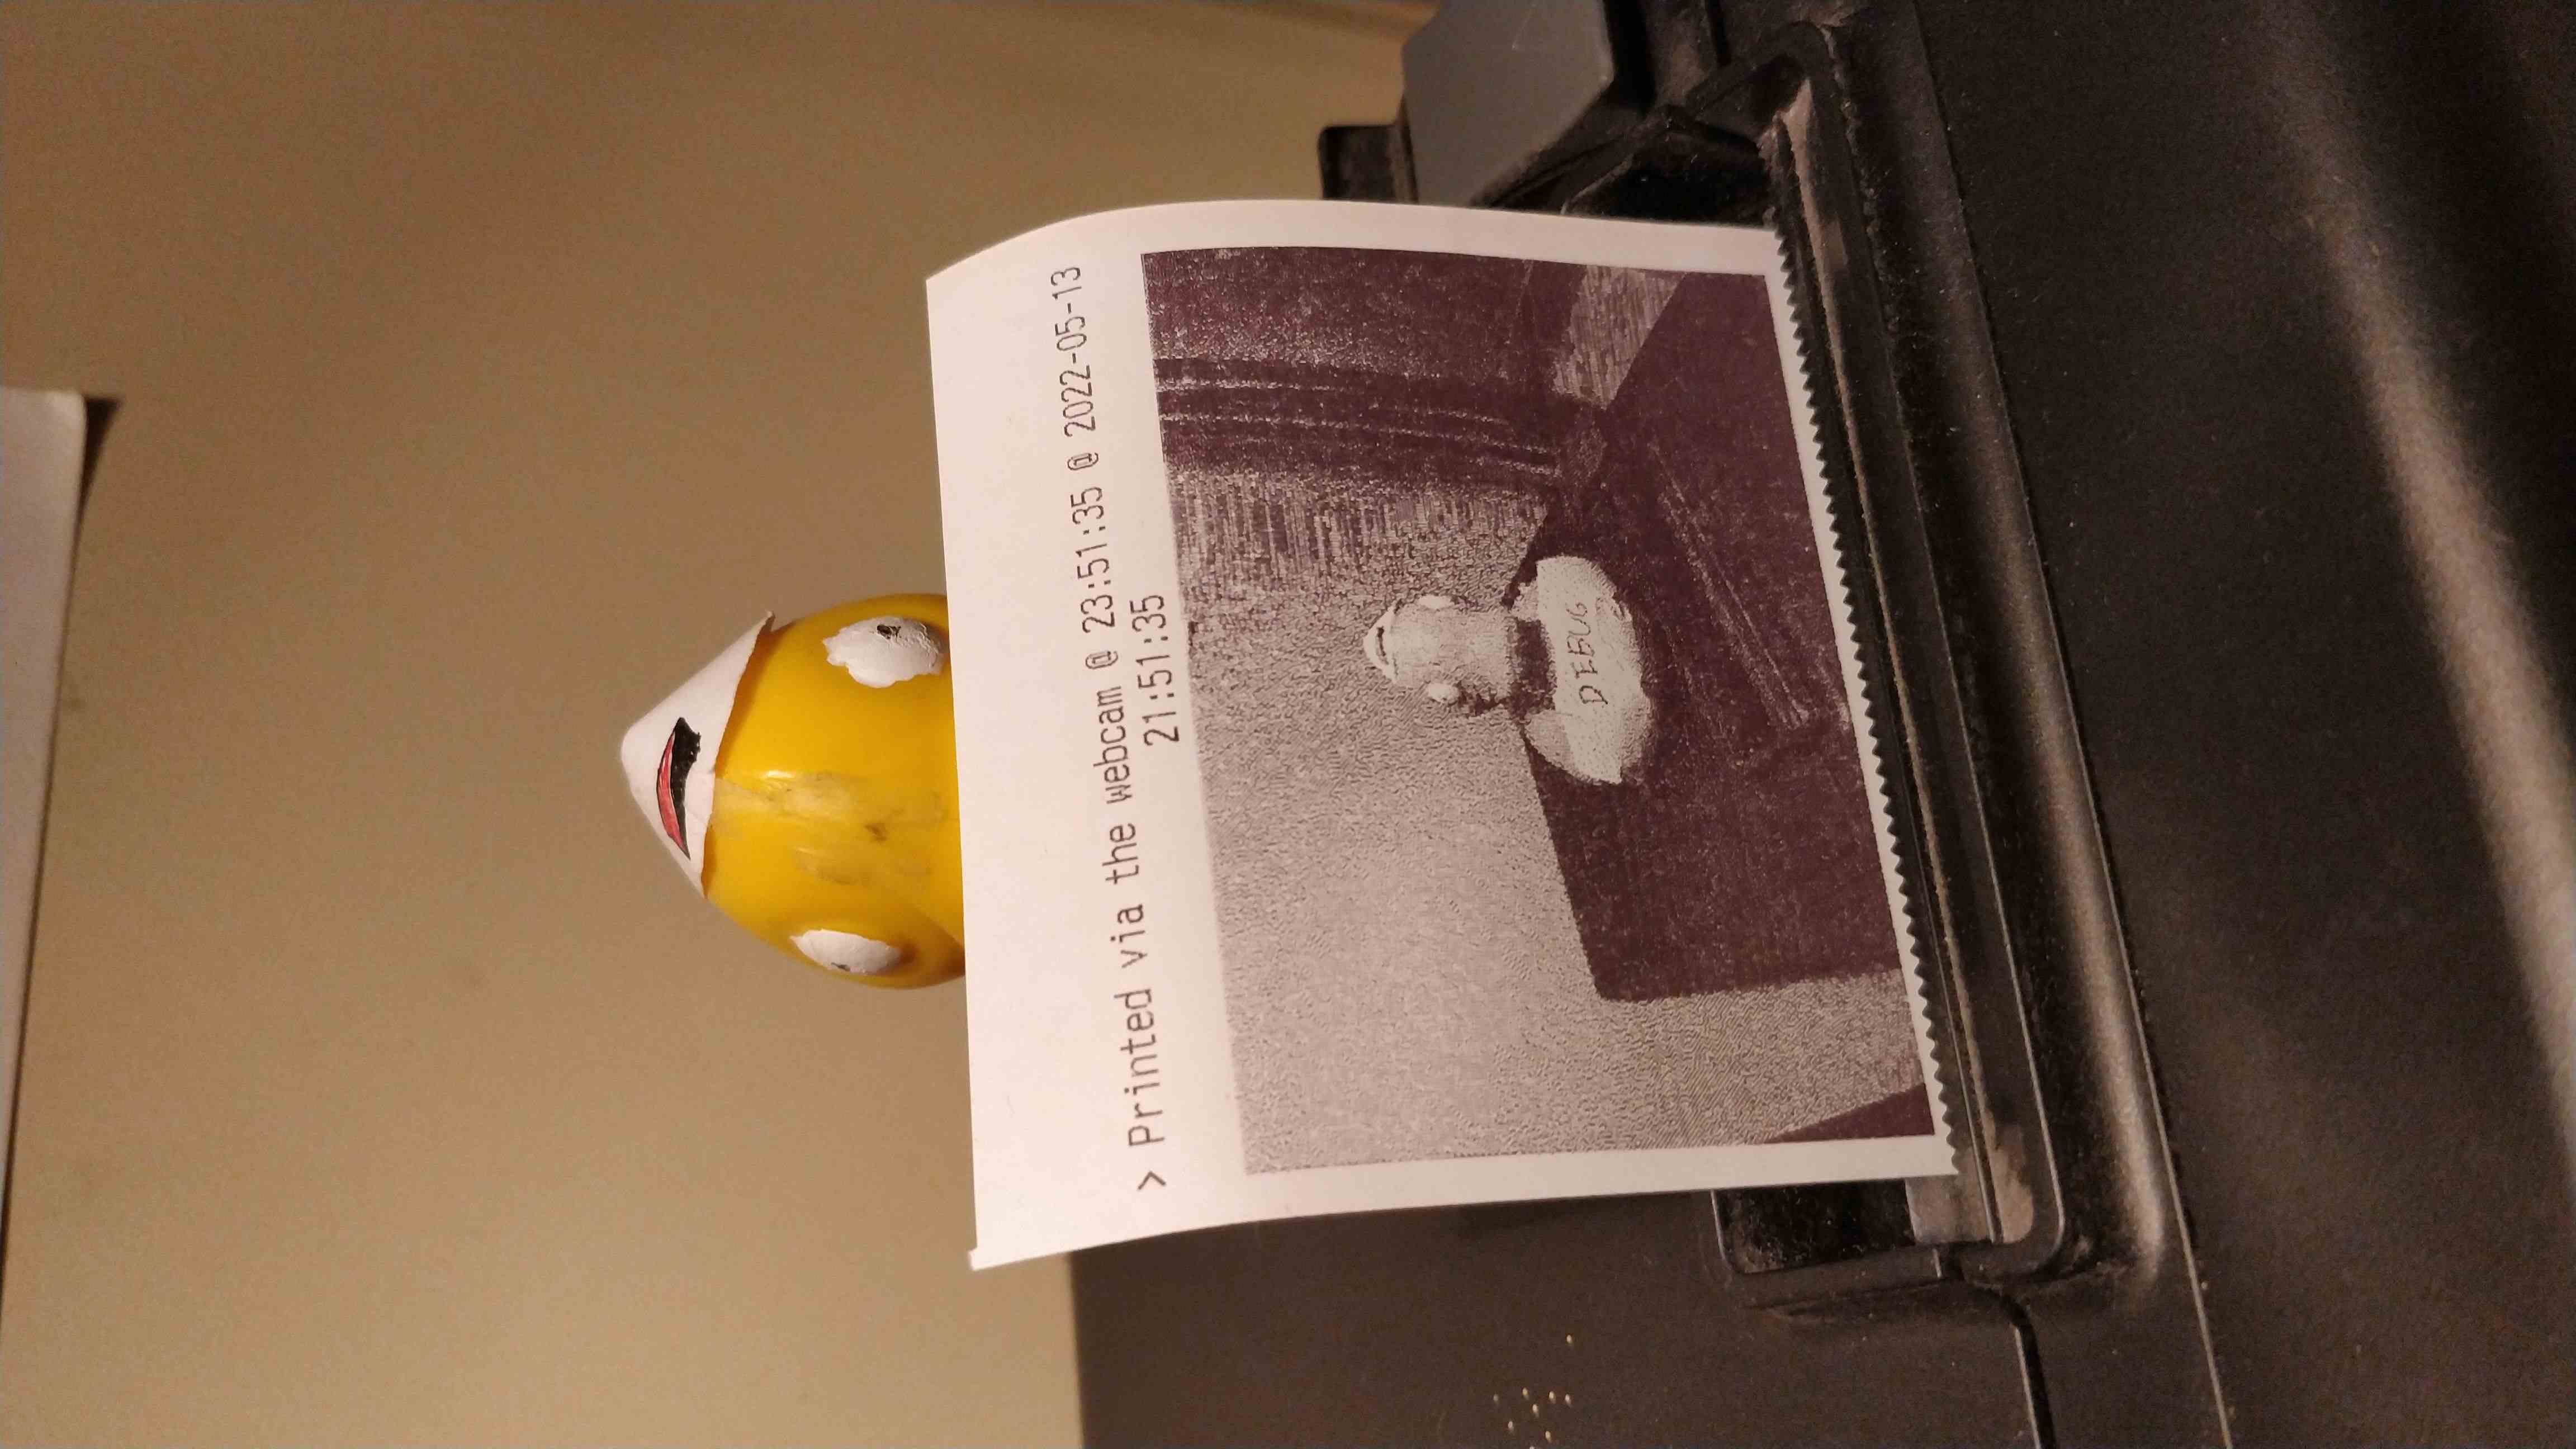 A picture of rubber duck on a thermal printer